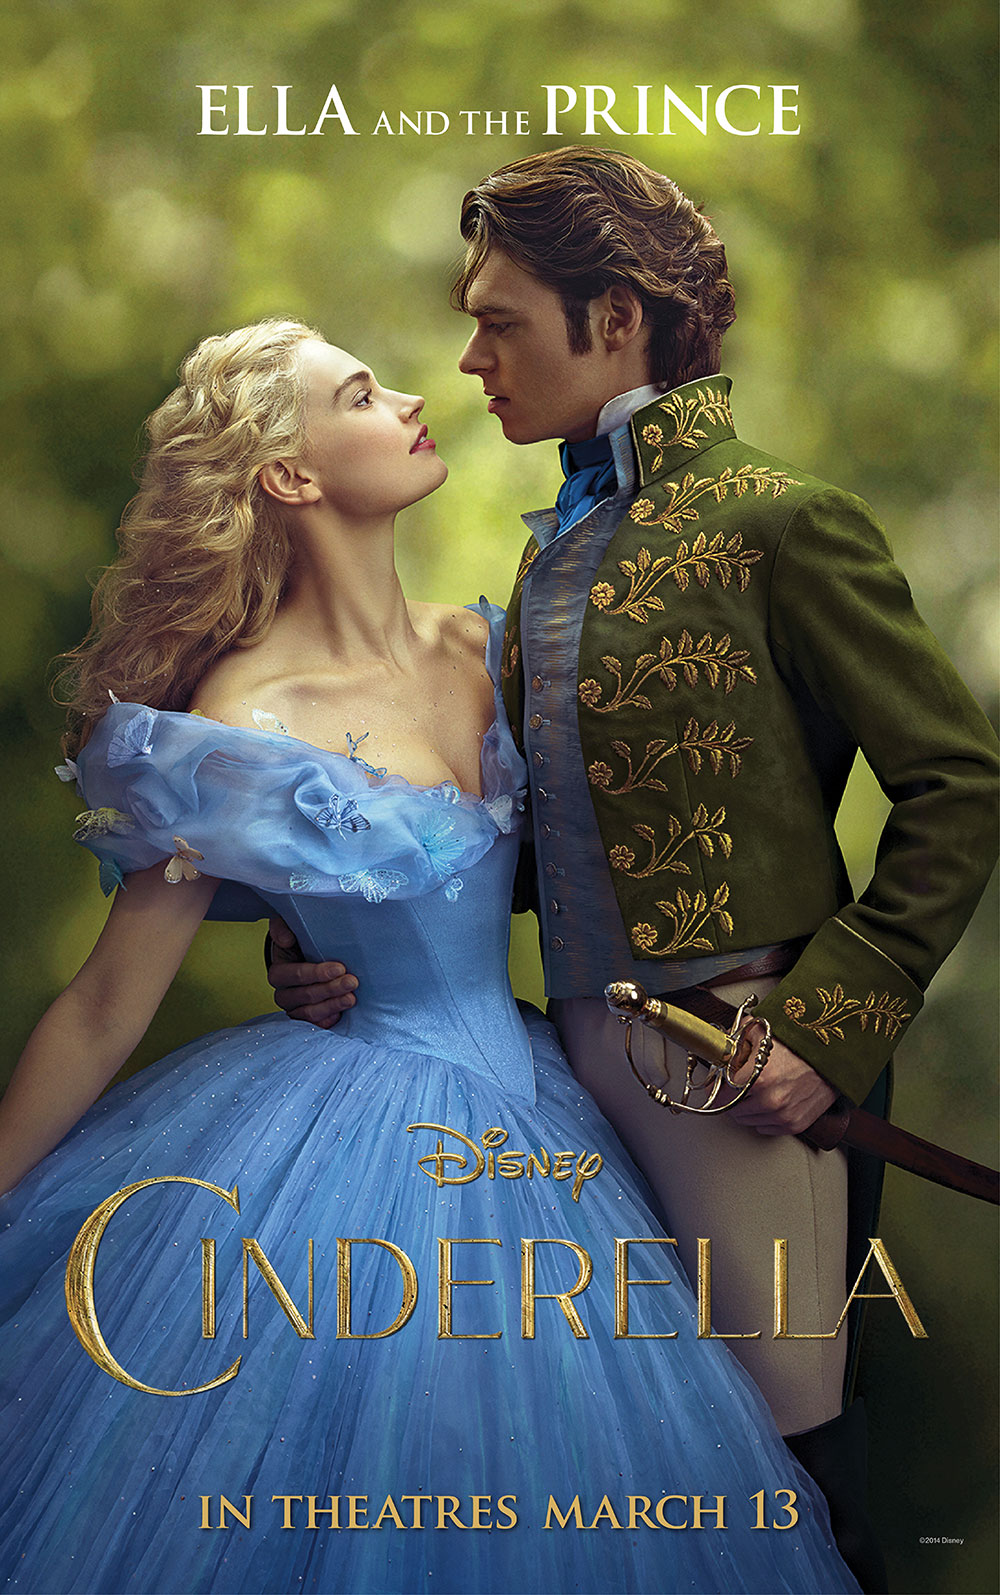 Cinderella Character Posters Give Us a Peek at the Beautiful Costumes